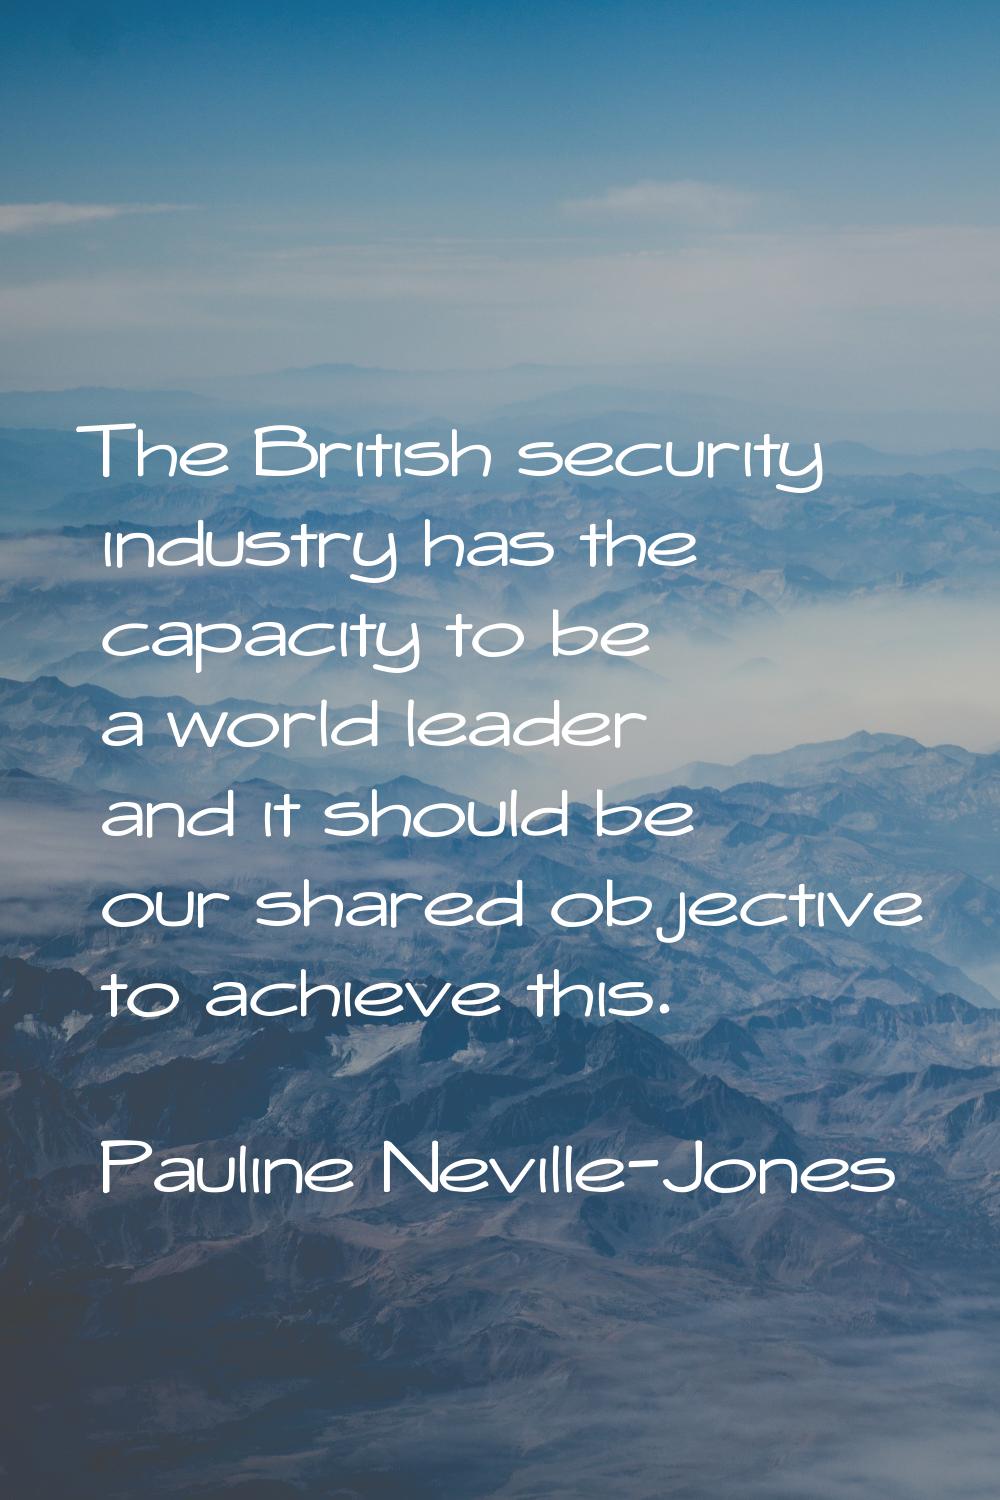 The British security industry has the capacity to be a world leader and it should be our shared obj